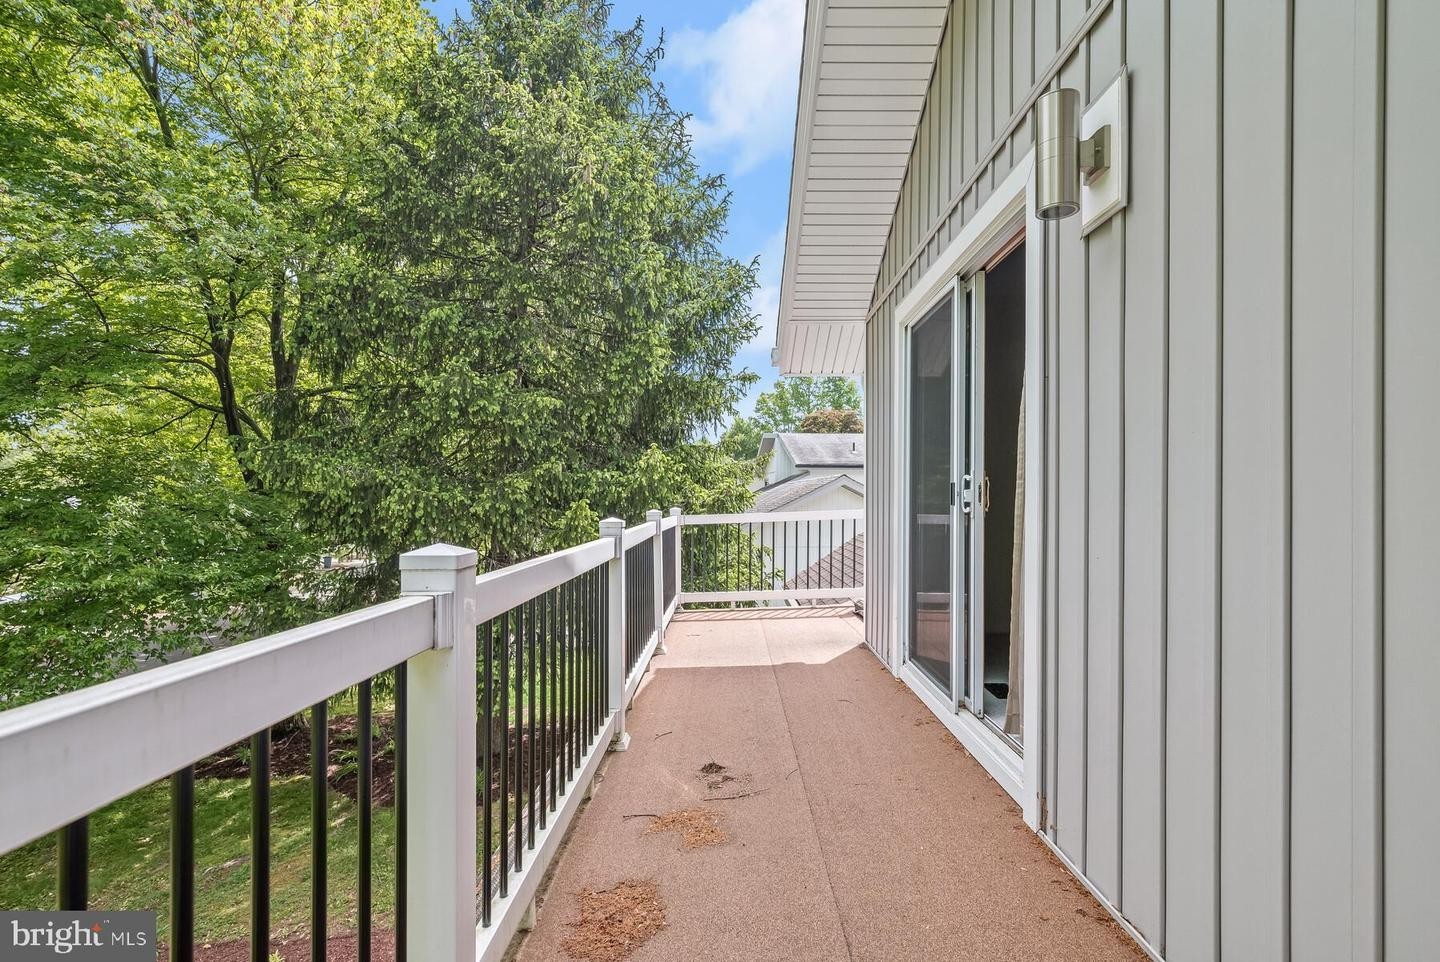 40. 14 Bannister Ct